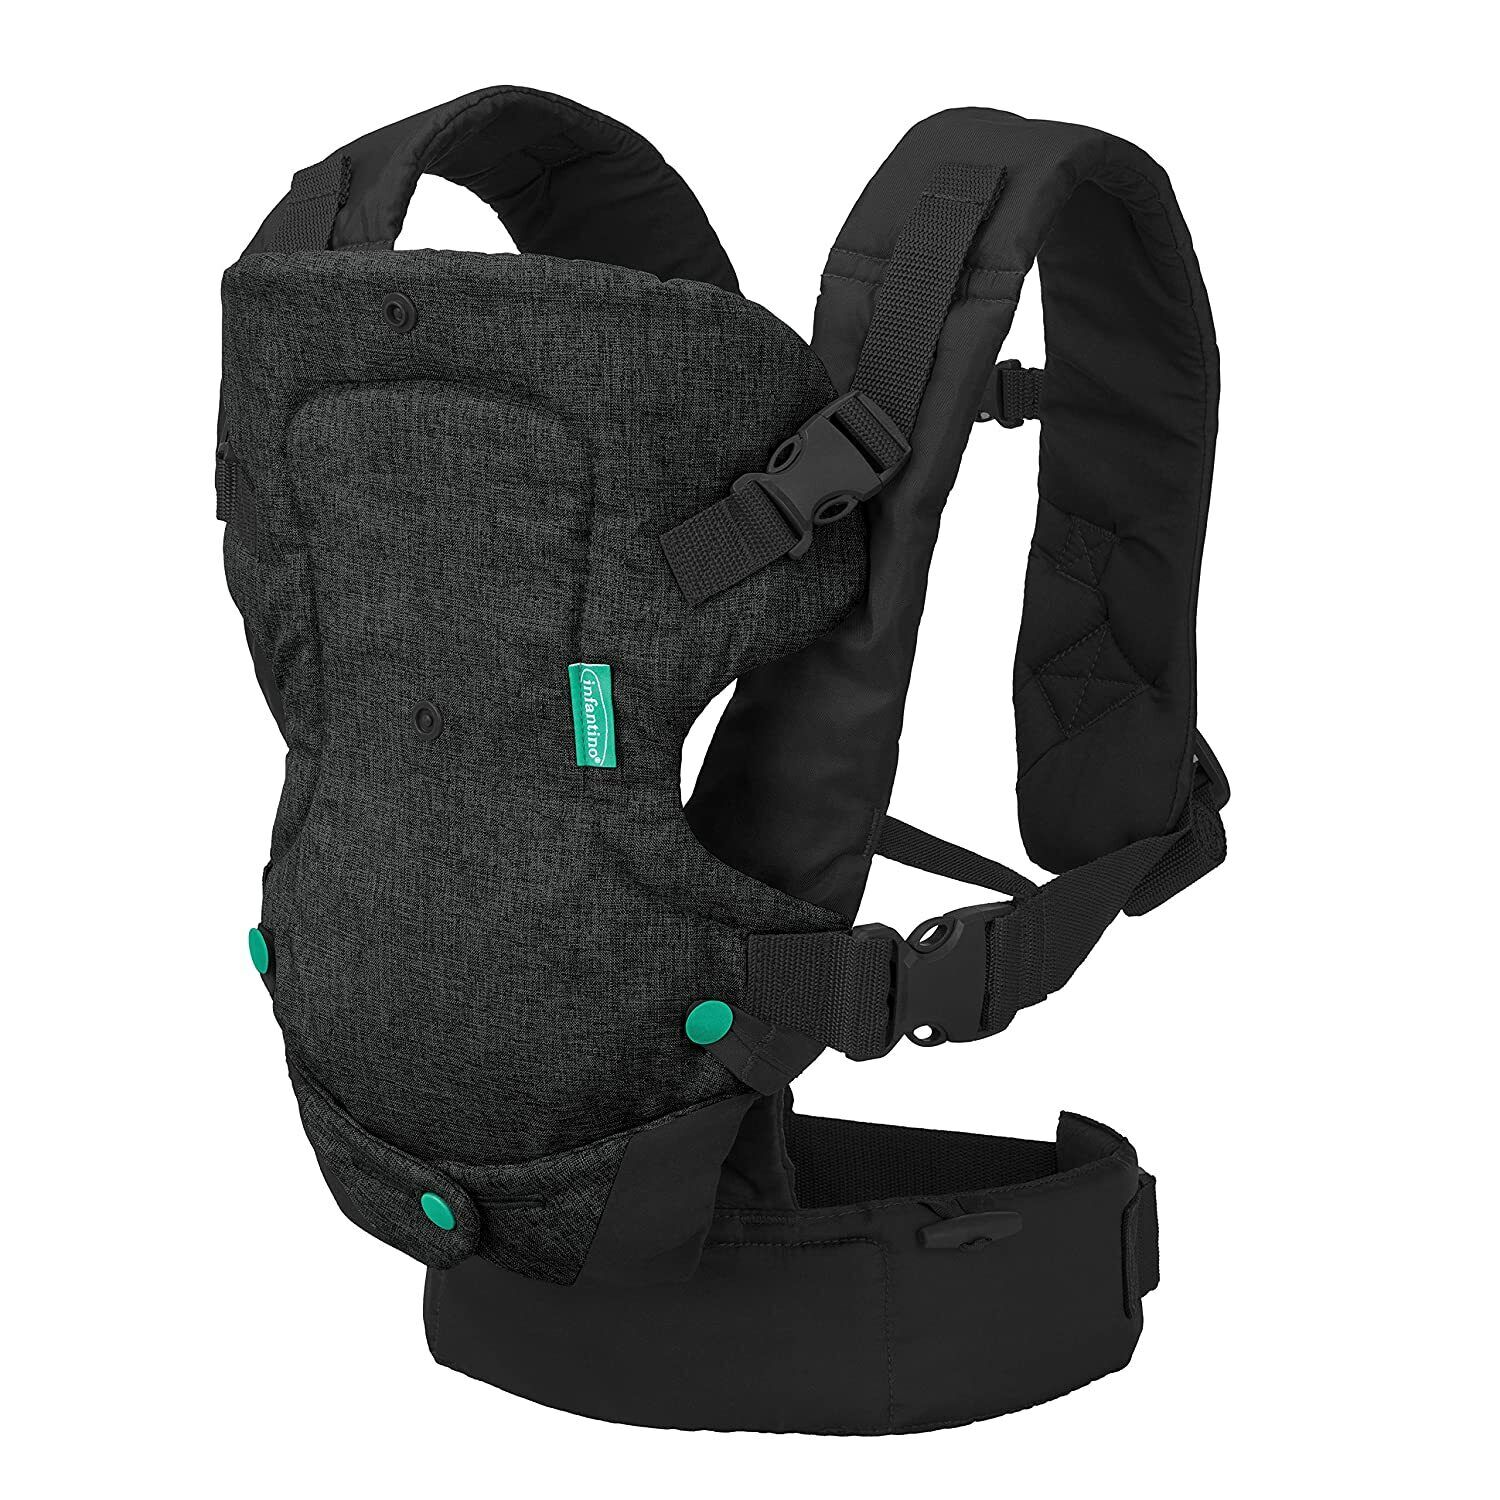 Infantino Flip 4-in-1 Carrier - Ergonomic, Convertible, face in-out NEW FREESHIP Unbranded Does Not Apply